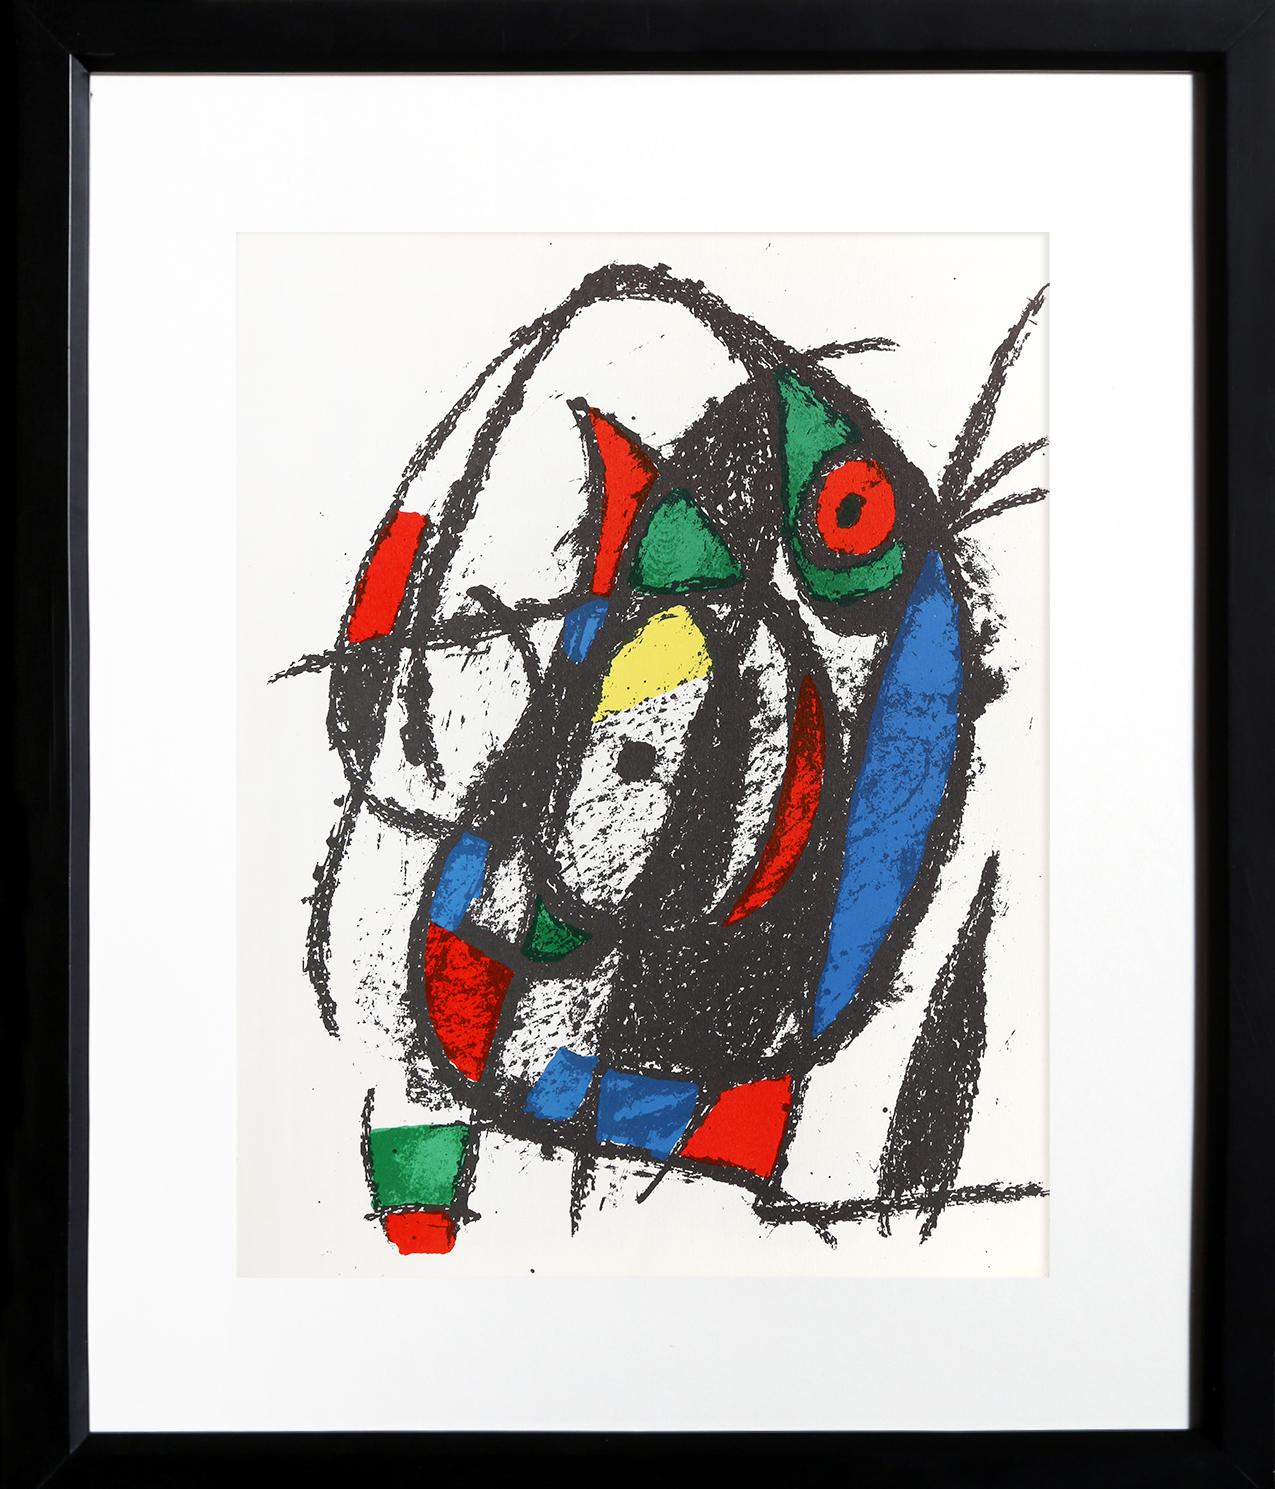 Joan Miro is known for his abstract, expressive, and child-like Modern style. Original lithograph published in Miro Lithographe II Catalogue Raisonne. Nicely framed.

Lithographs II (1040)
Joan Miro, Spanish (1893–1983)
Date: 1975
Lithograph
Size: